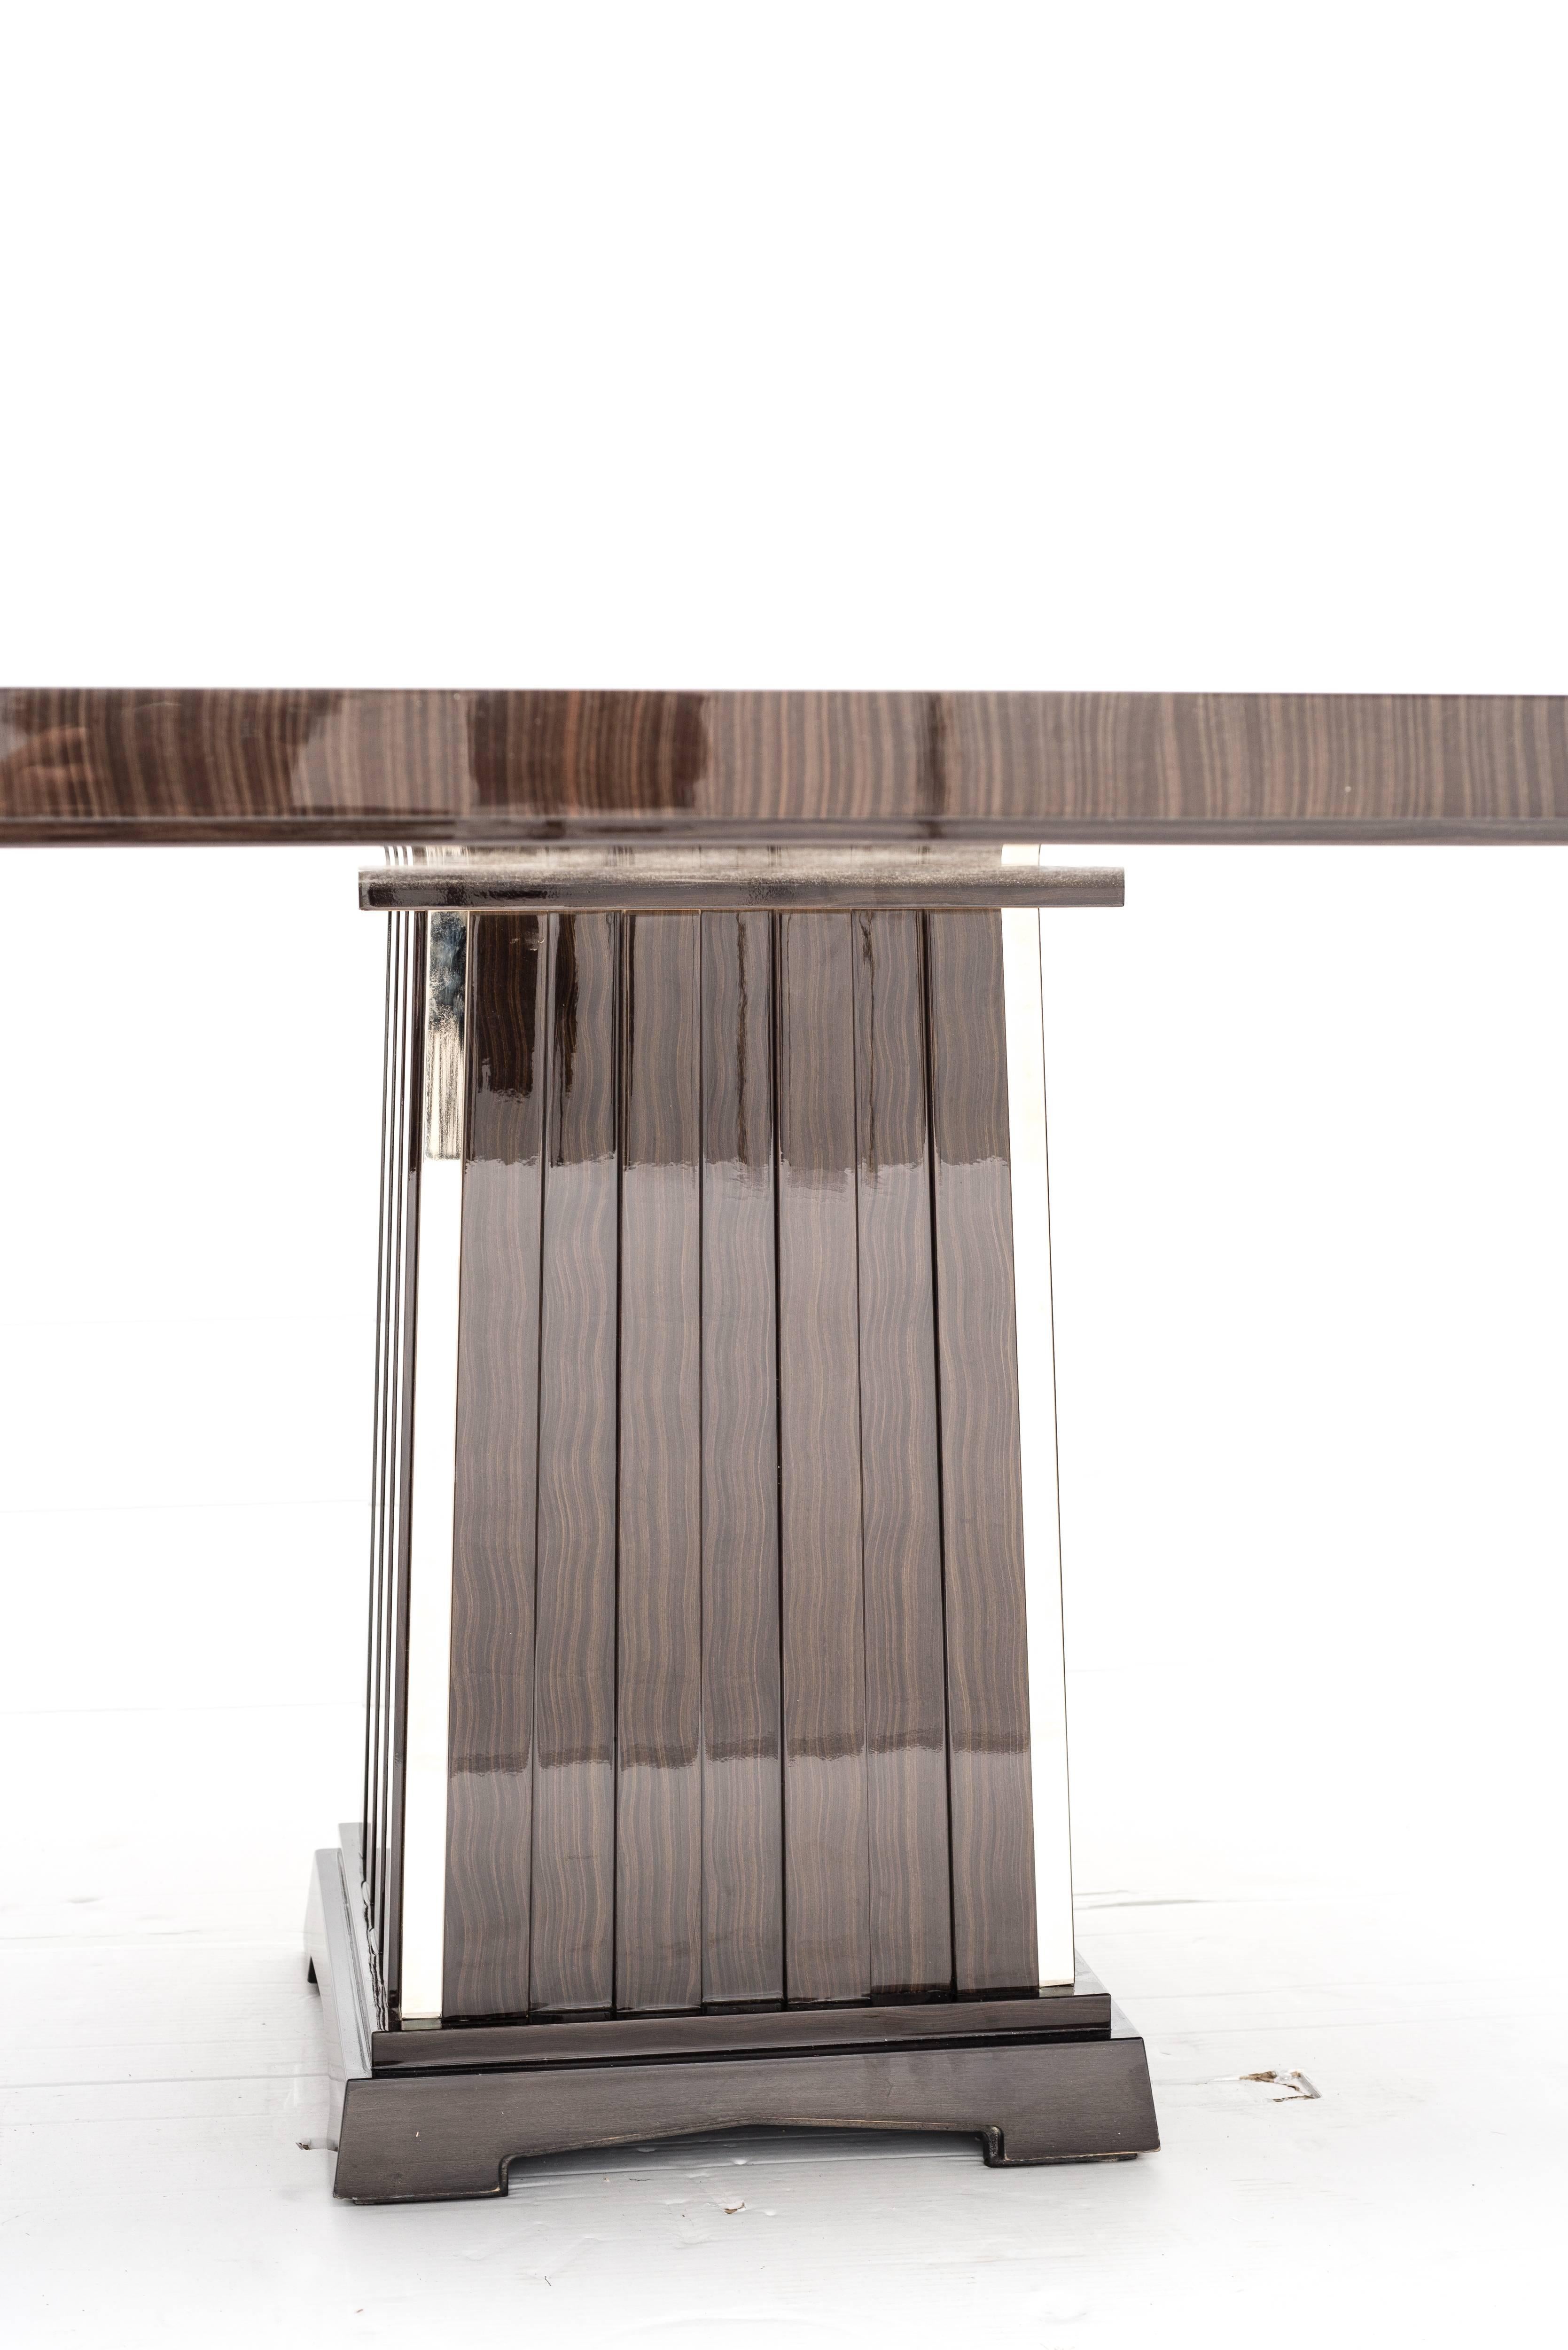 Italian Art Deco Style Important Dining Room Table, Veneer Wood Top and Chrome Inserts For Sale